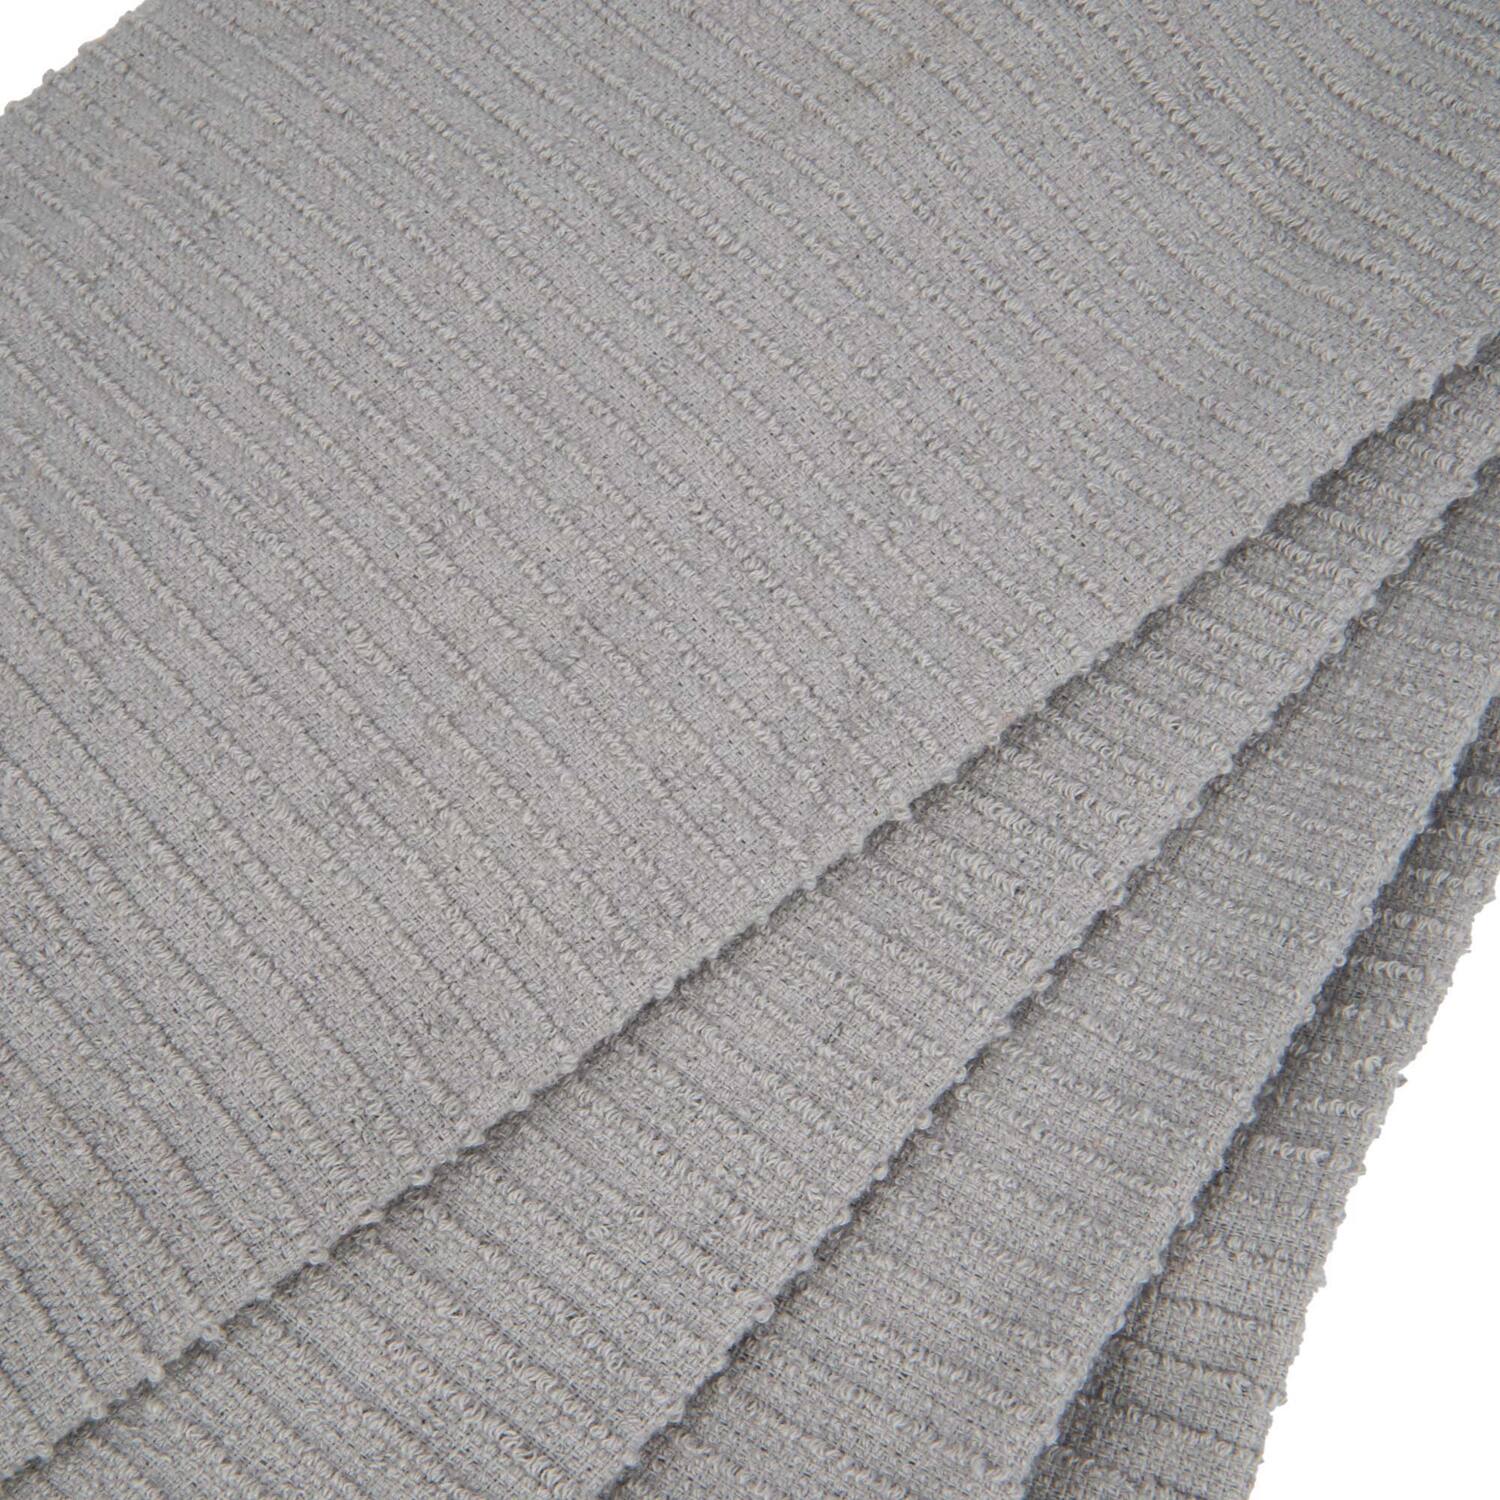 Pack of 2 Essentials Ribbed Terry Tea Towels - Grey Image 2